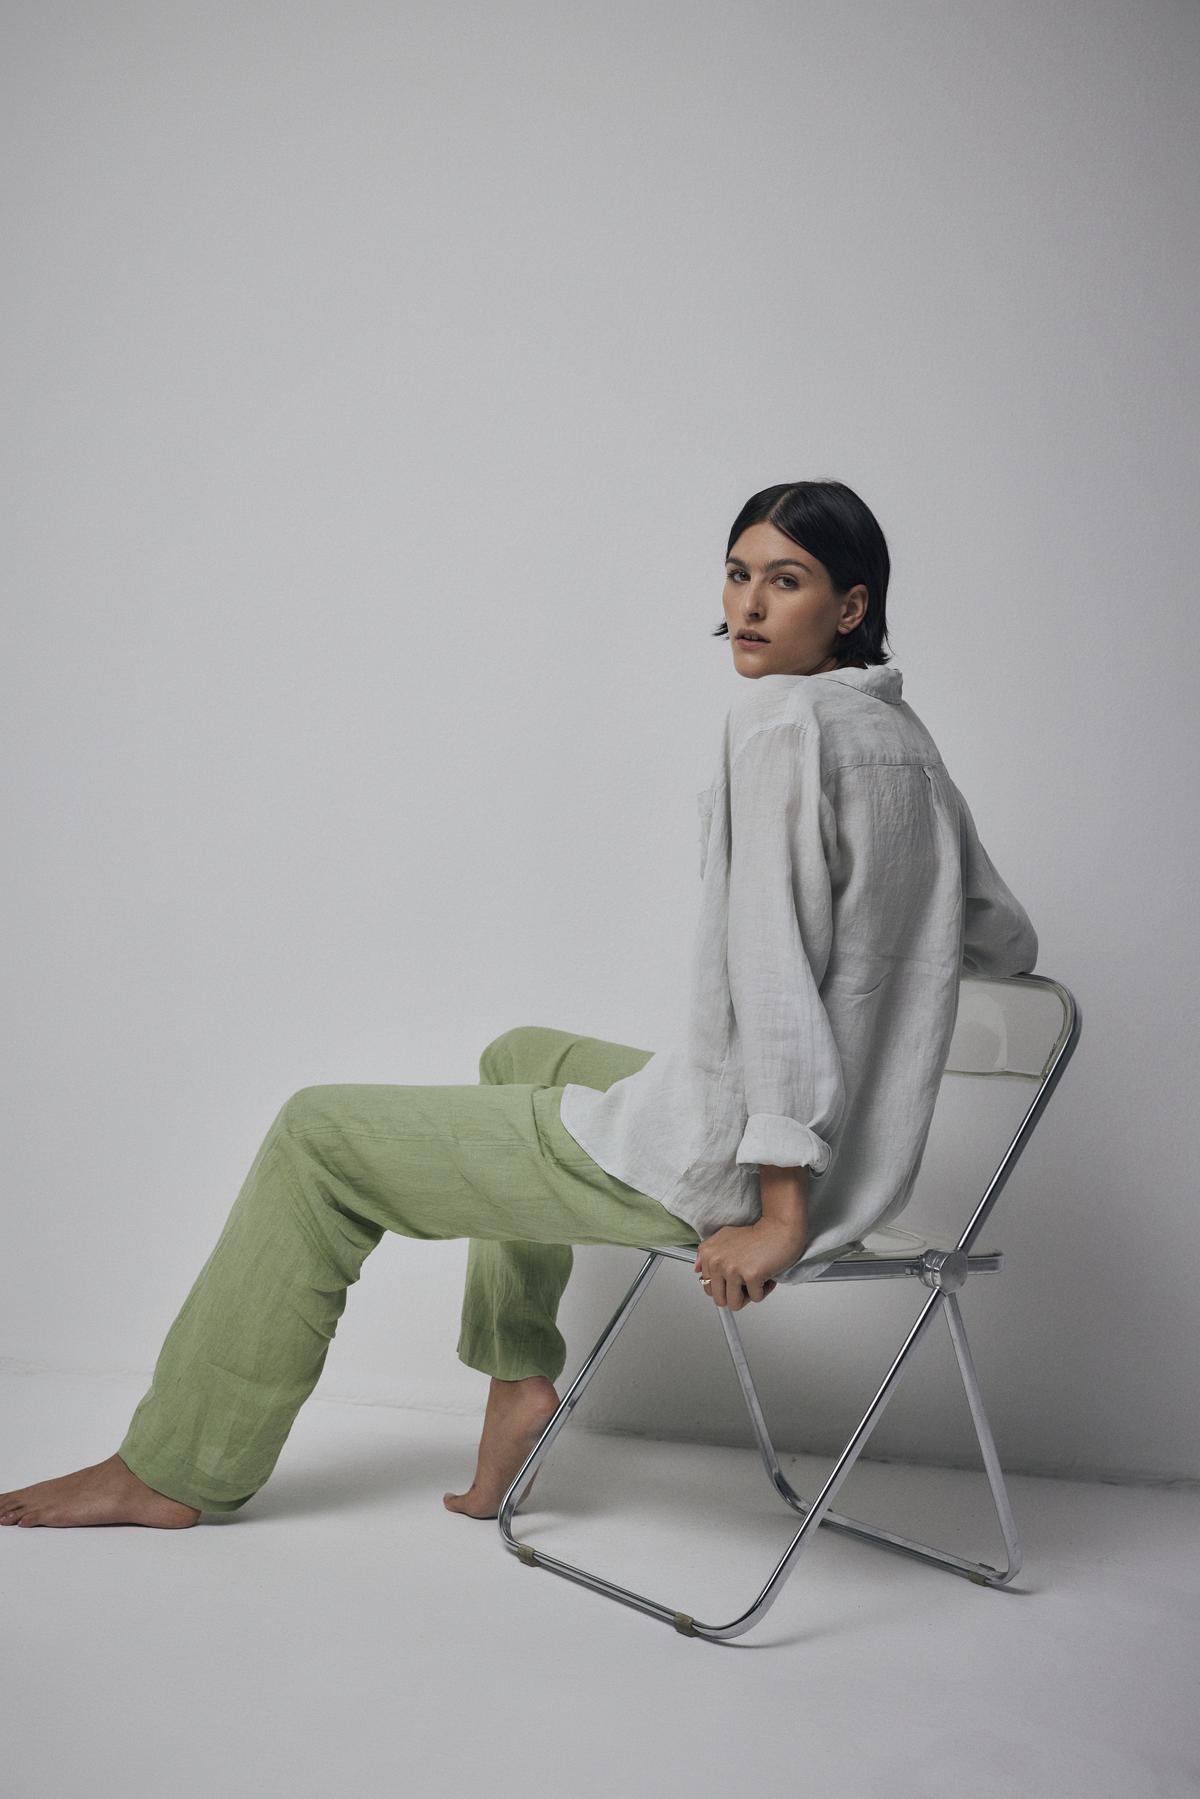   A person with long dark hair, dressed in a relaxed silhouette featuring a light-colored MULHOLLAND LINEN SHIRT by Velvet by Jenny Graham and green pants, sits barefoot on a folding chair against a plain backdrop. 